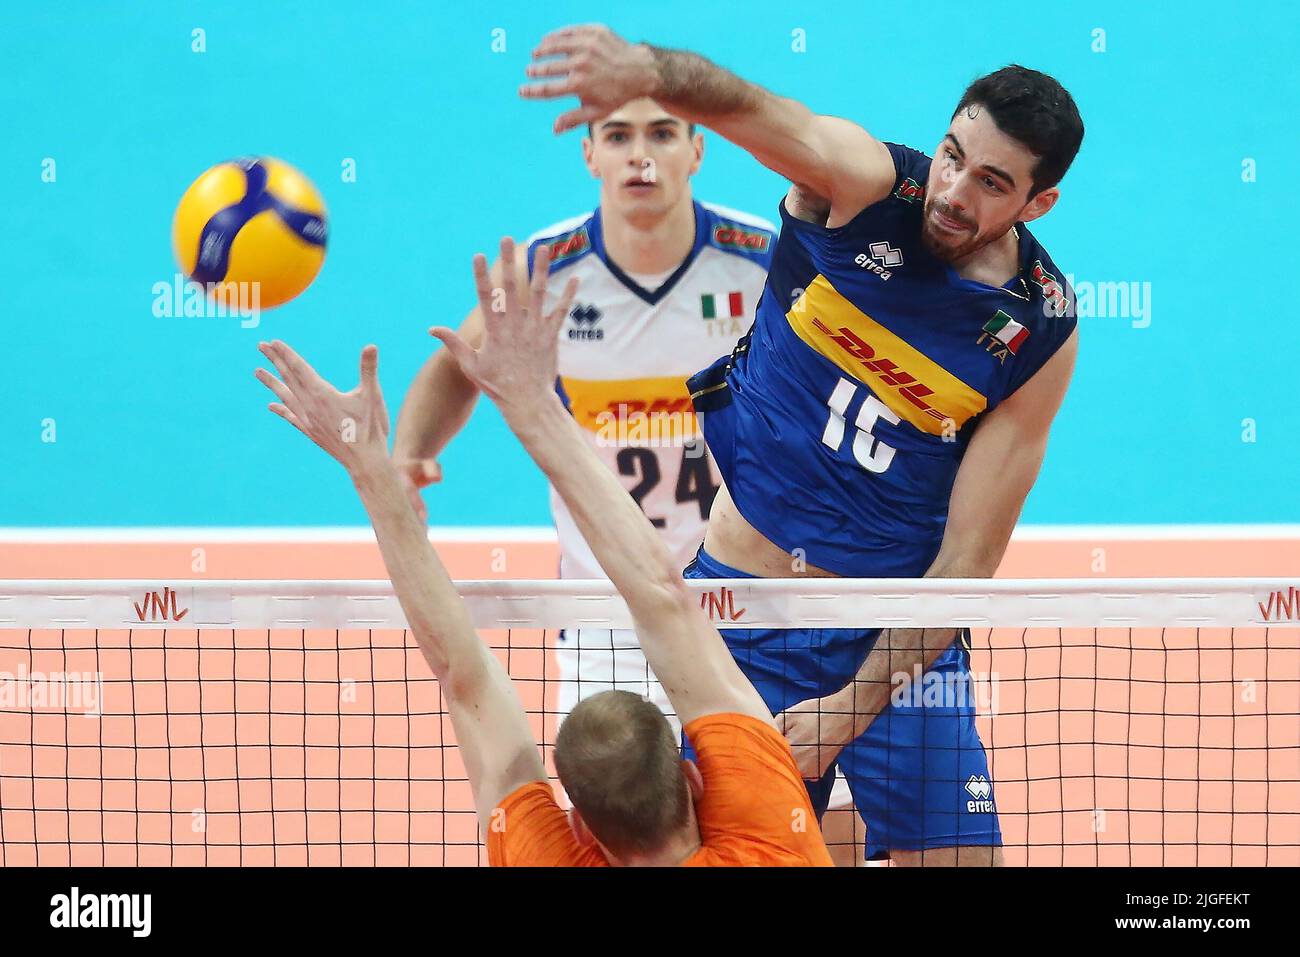 Gdansk, Poland. 10th July, 2022. Daniele Lavia (R) of Italy during the 2022 men's FIVB Volleyball Nations League match between Italy and the Netherlands in Credit: PAP/Alamy Live News Stock Photo